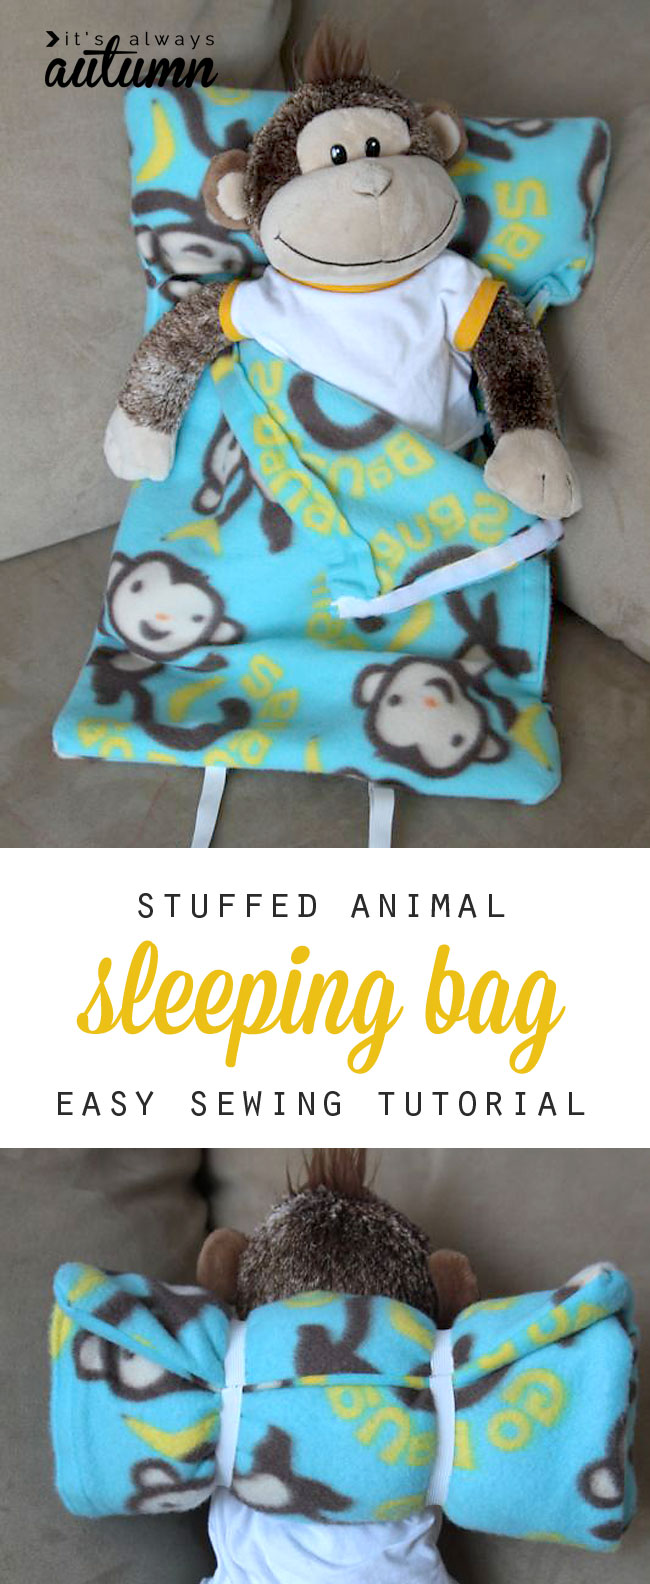 easy sewing tutorial for this adorable stuffed animal sleeping bag - my son would love this!